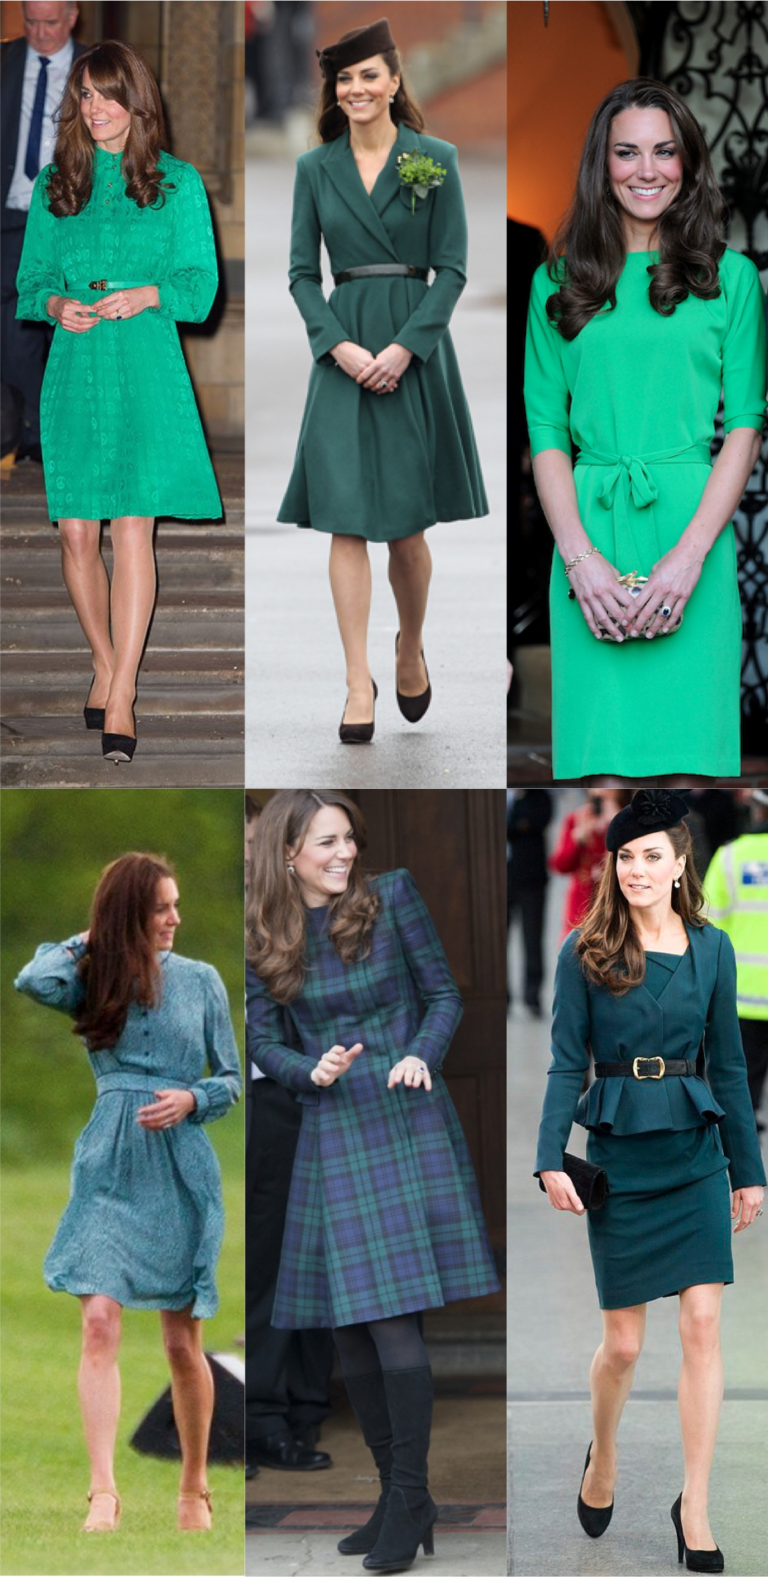 Did Kate Middleton Inspire Pantone’s 2013 Color of the Year ‘Emerald Green’?